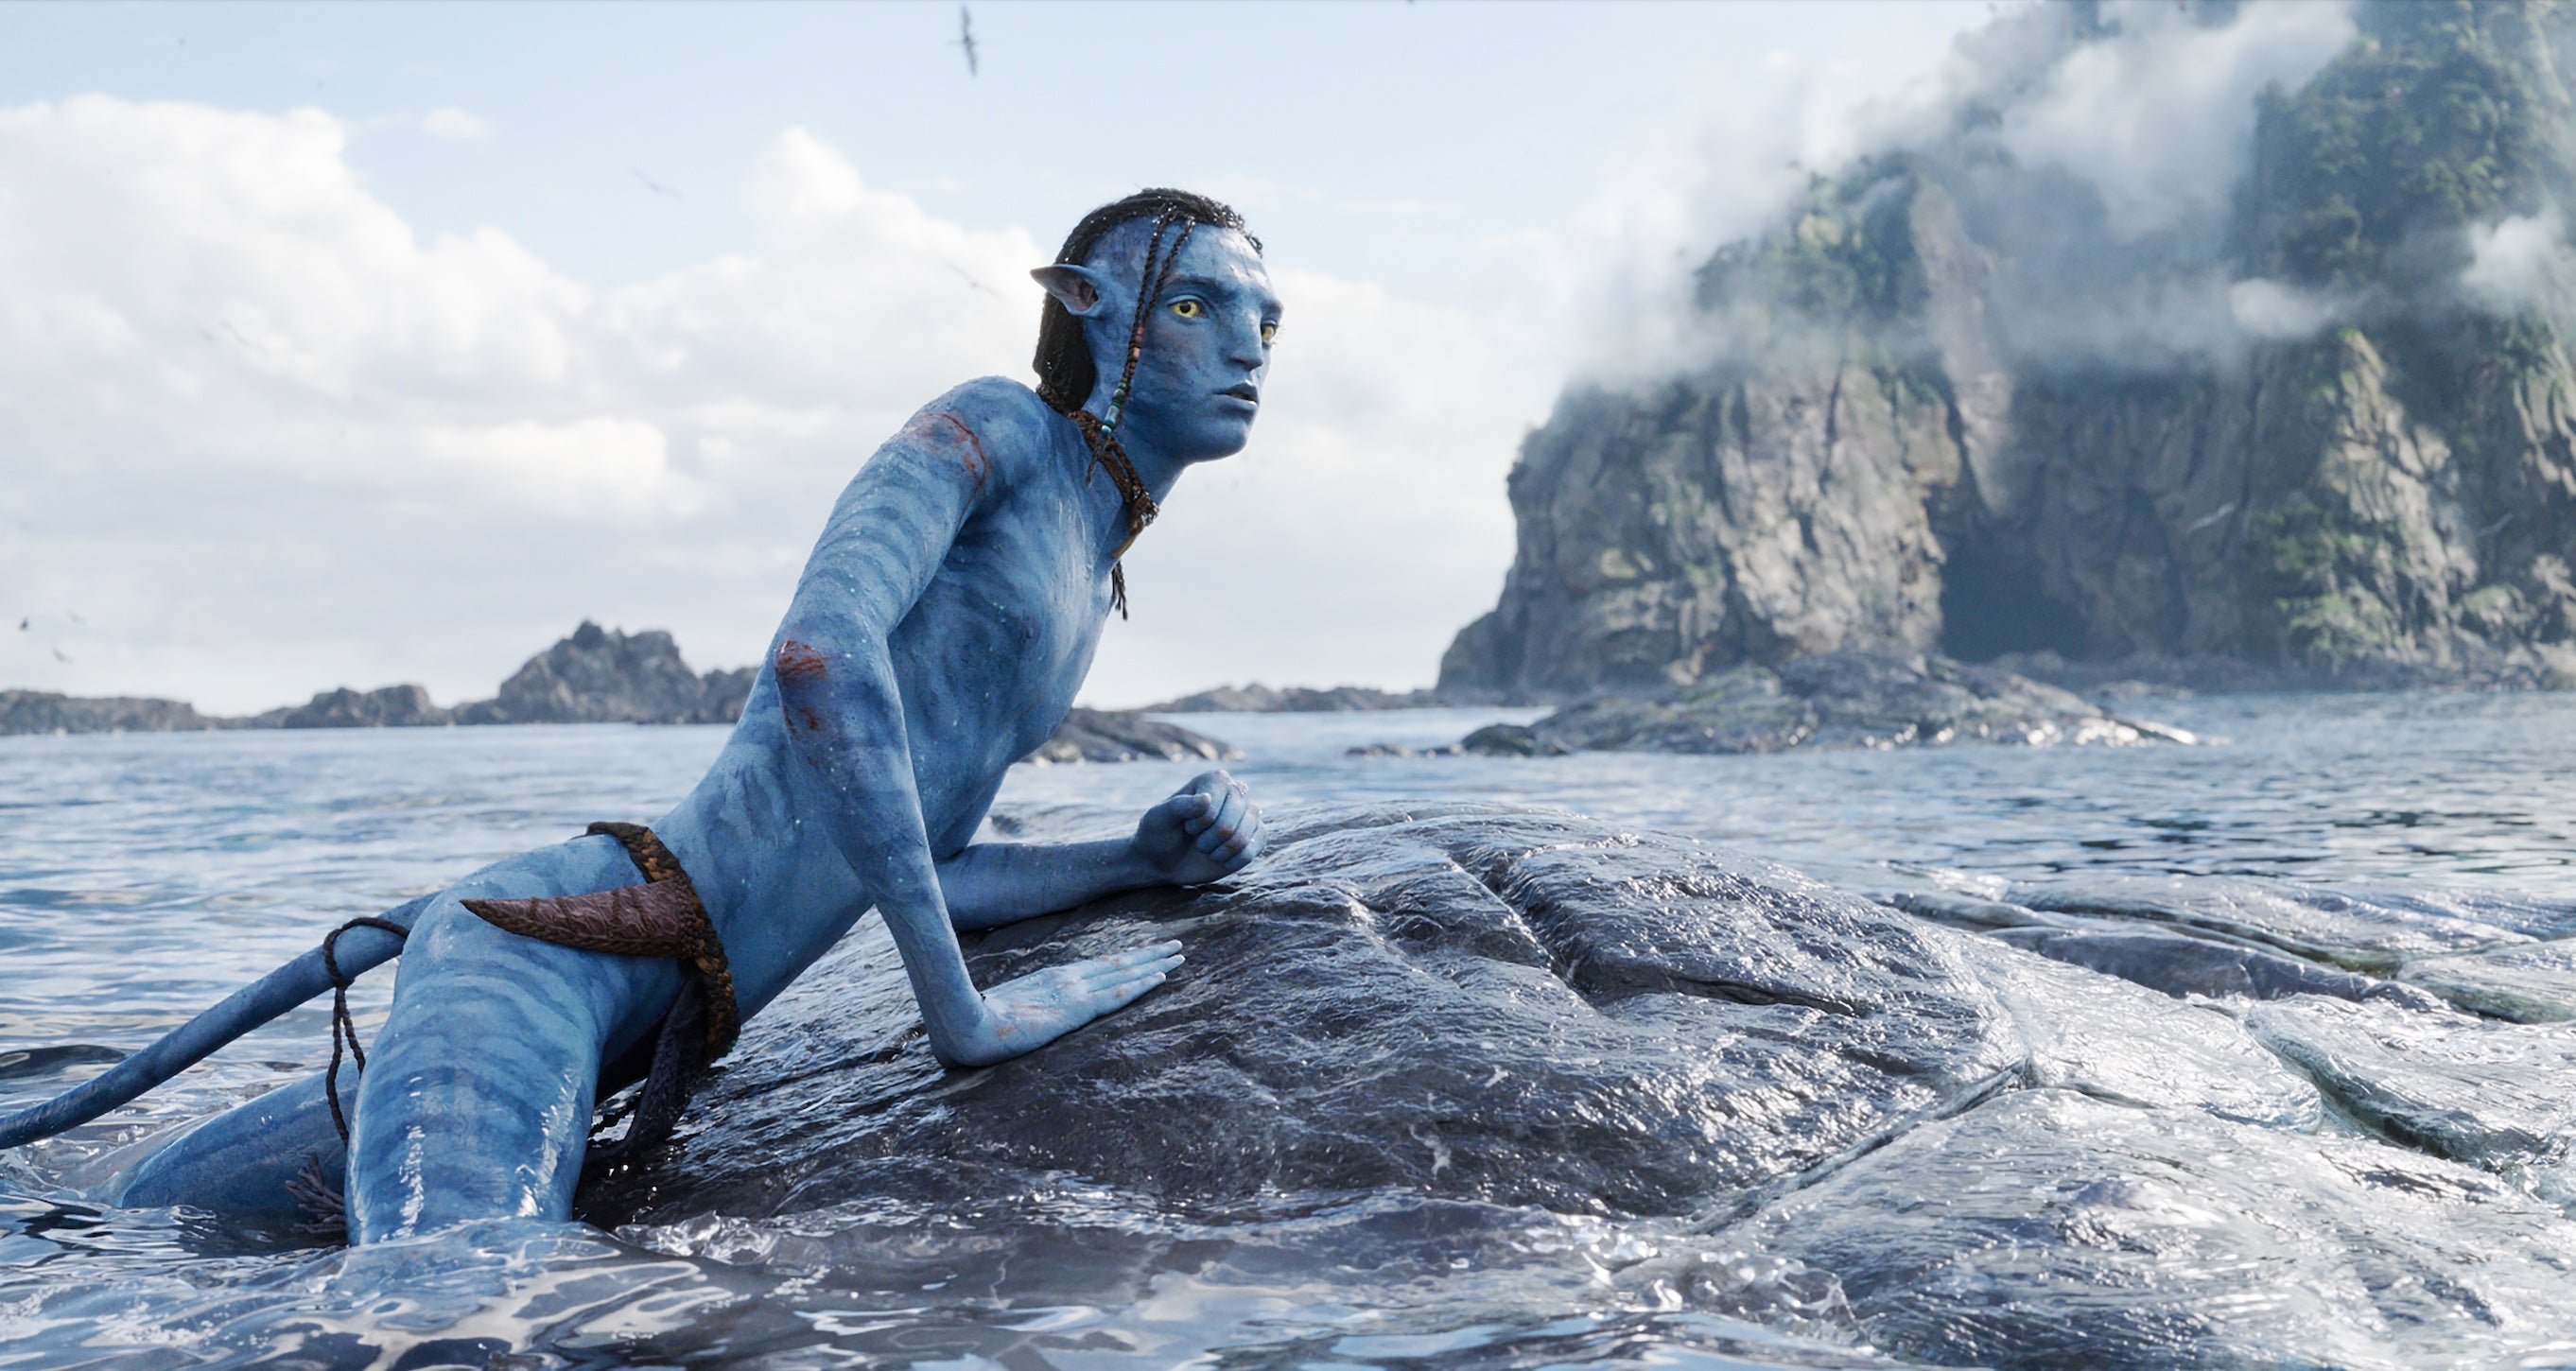  Lo'ak (Britain Dalton) is a stand out in Avatar: The Way of Water (Image: Disney)